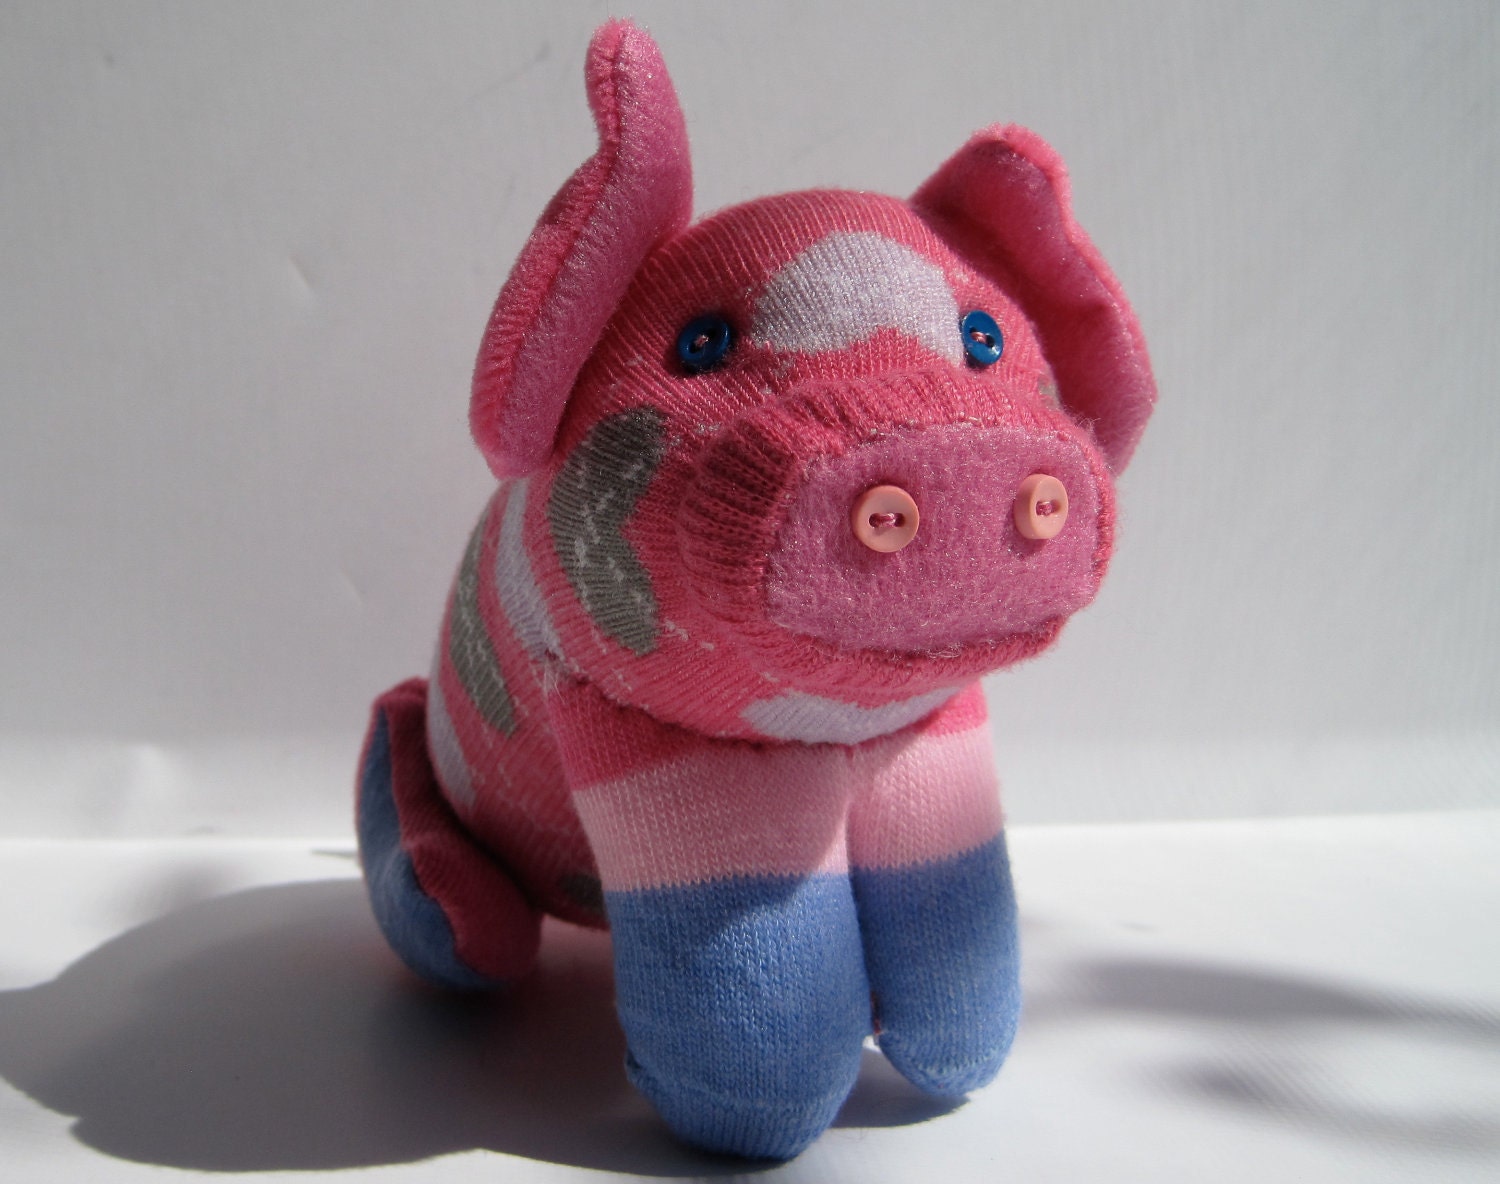 PIGGI LONGSTOCKINGS adorable sock toy piglet with striped stockings and argyle hearts